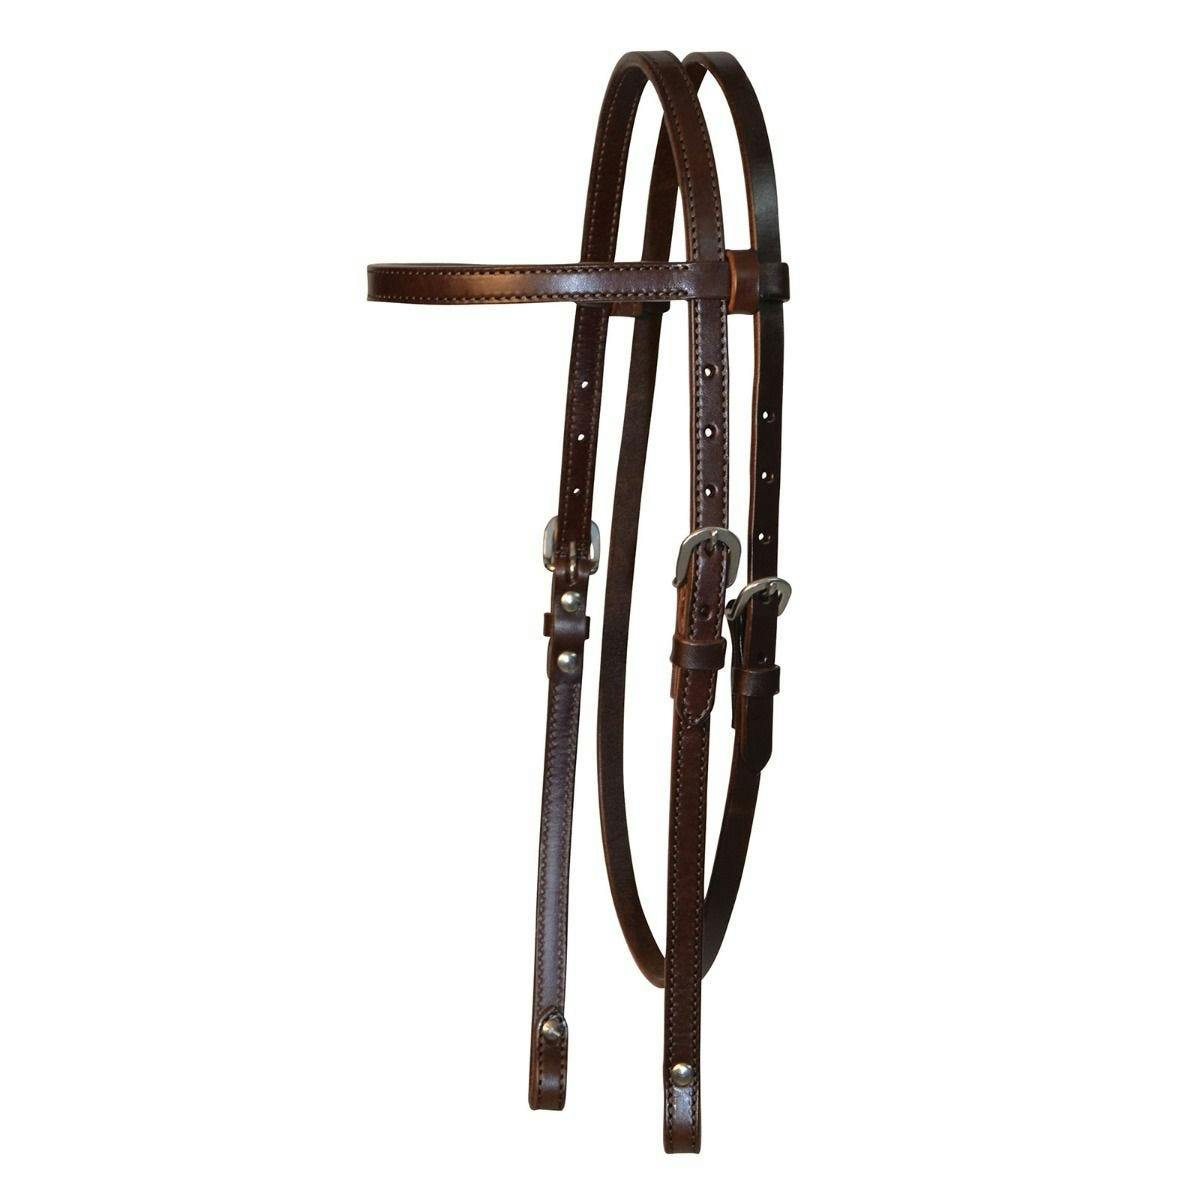 Chicago Screw End Smooth Browband Headstall